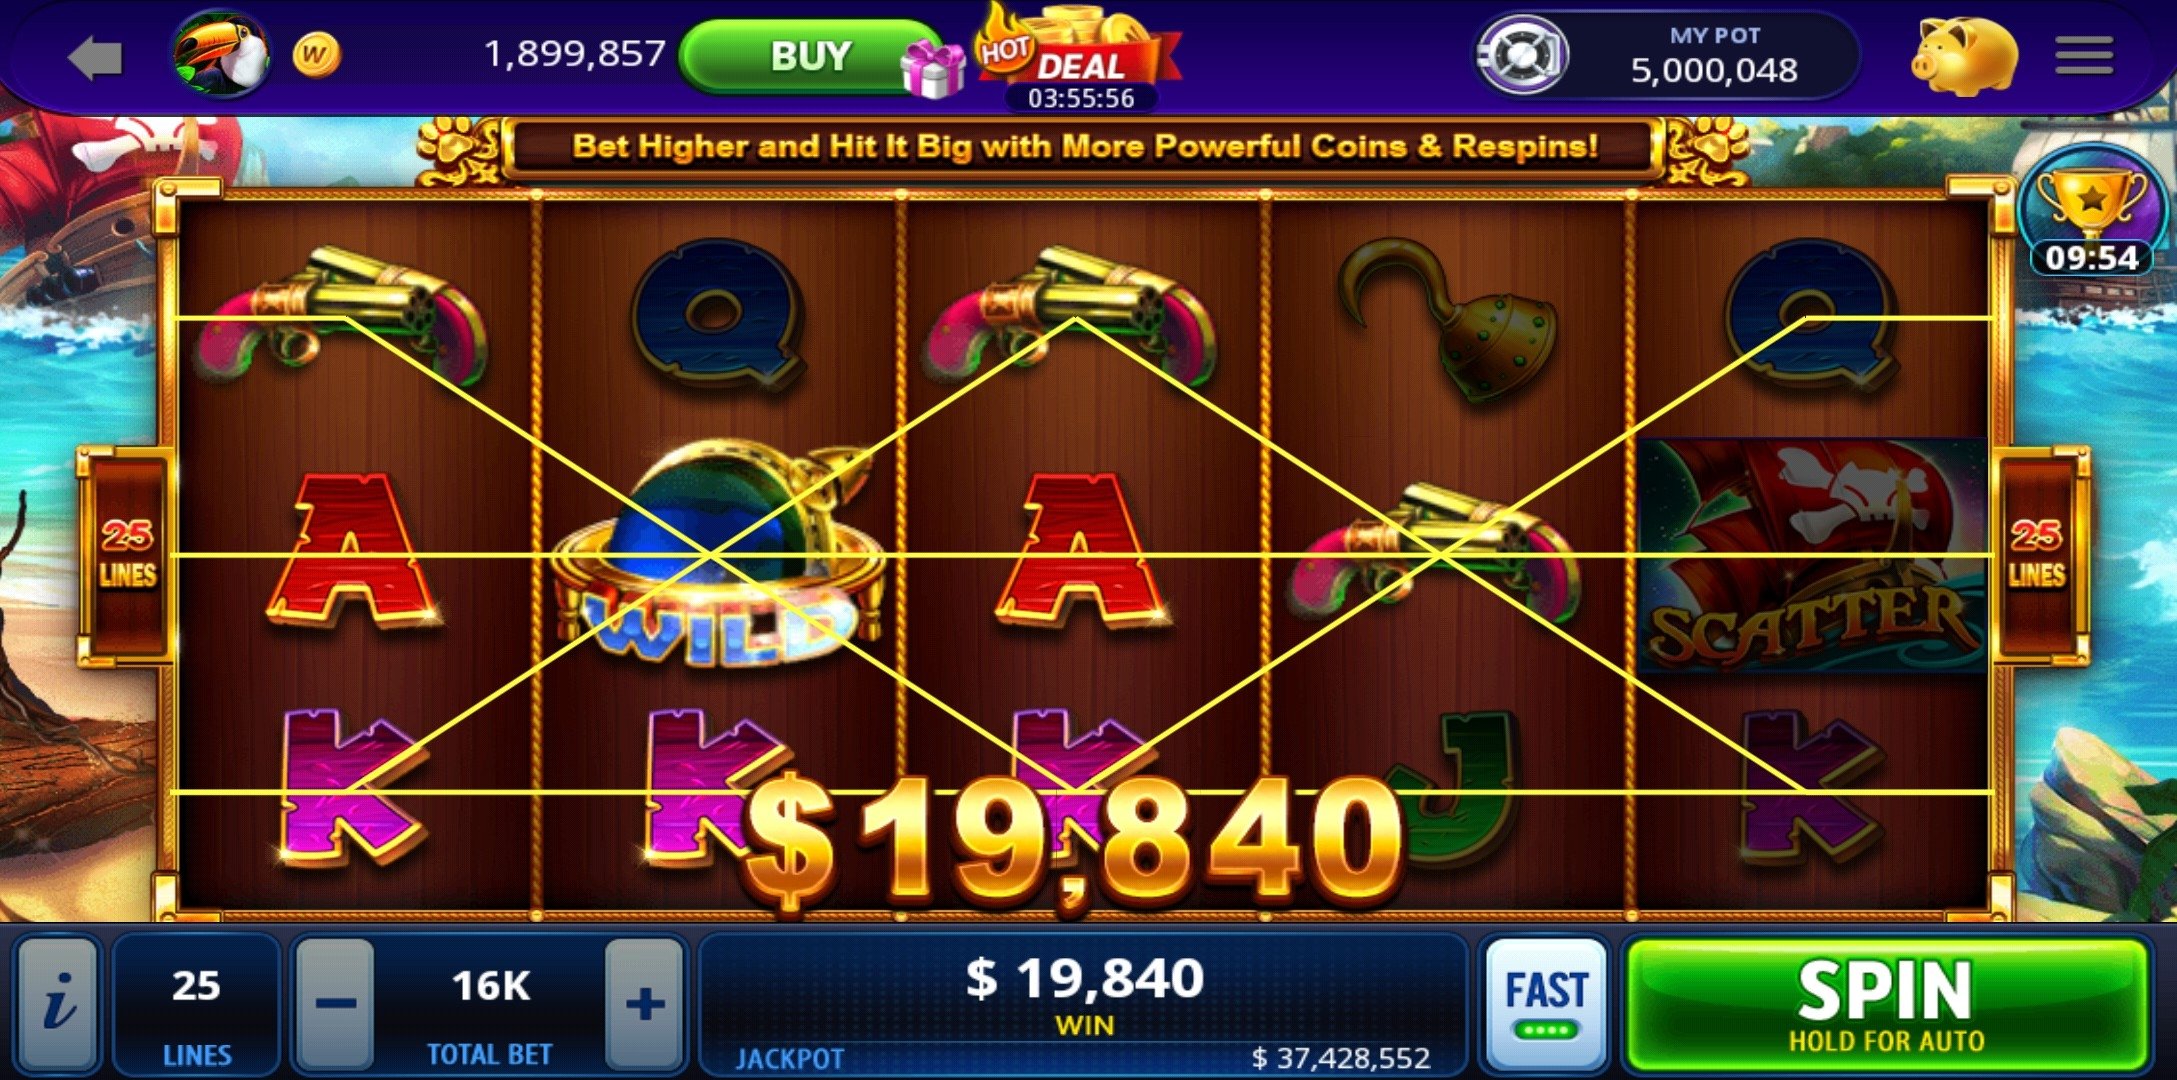 Mega888 apk for android 4.0 4